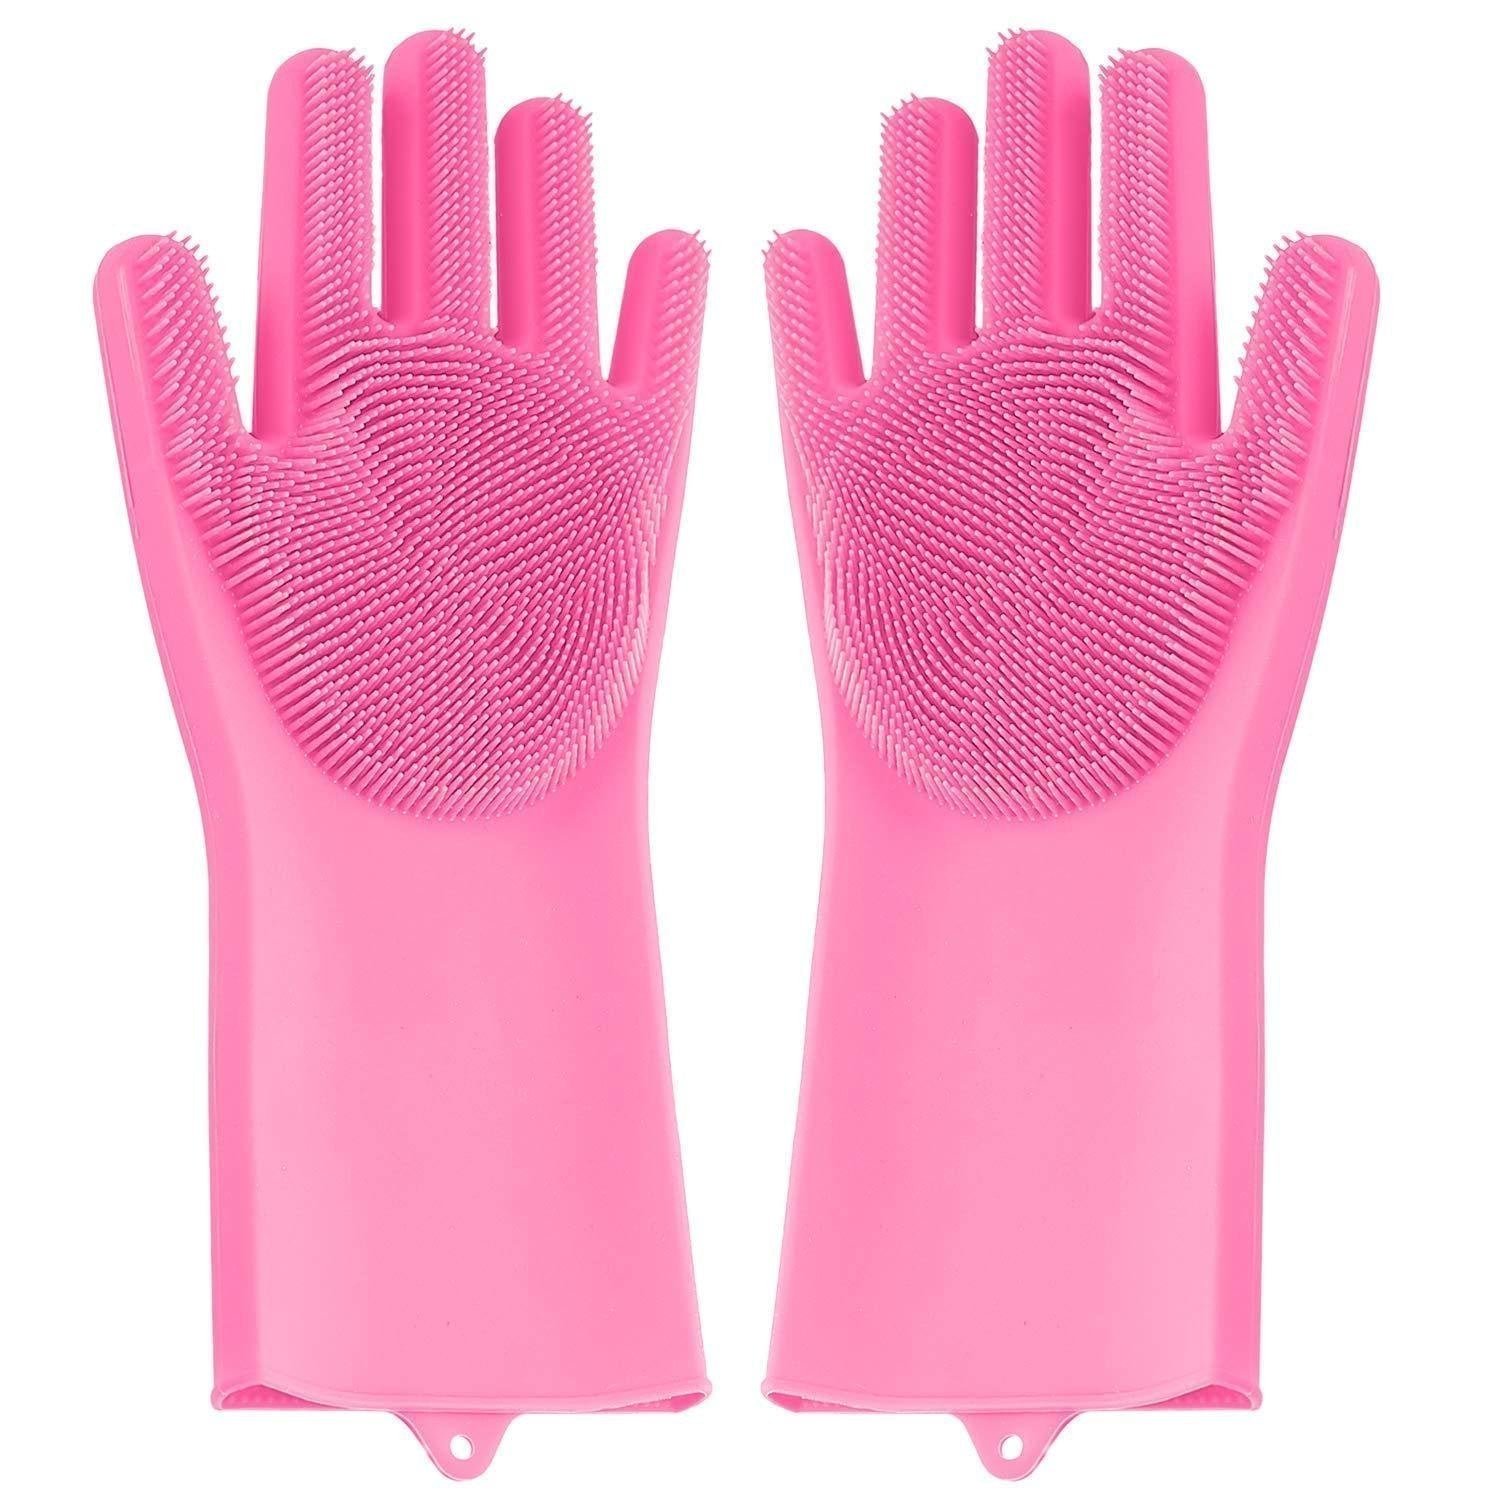 0714-reusable-silicone-cleaning-brush-scrubber-gloves-multicolor-2